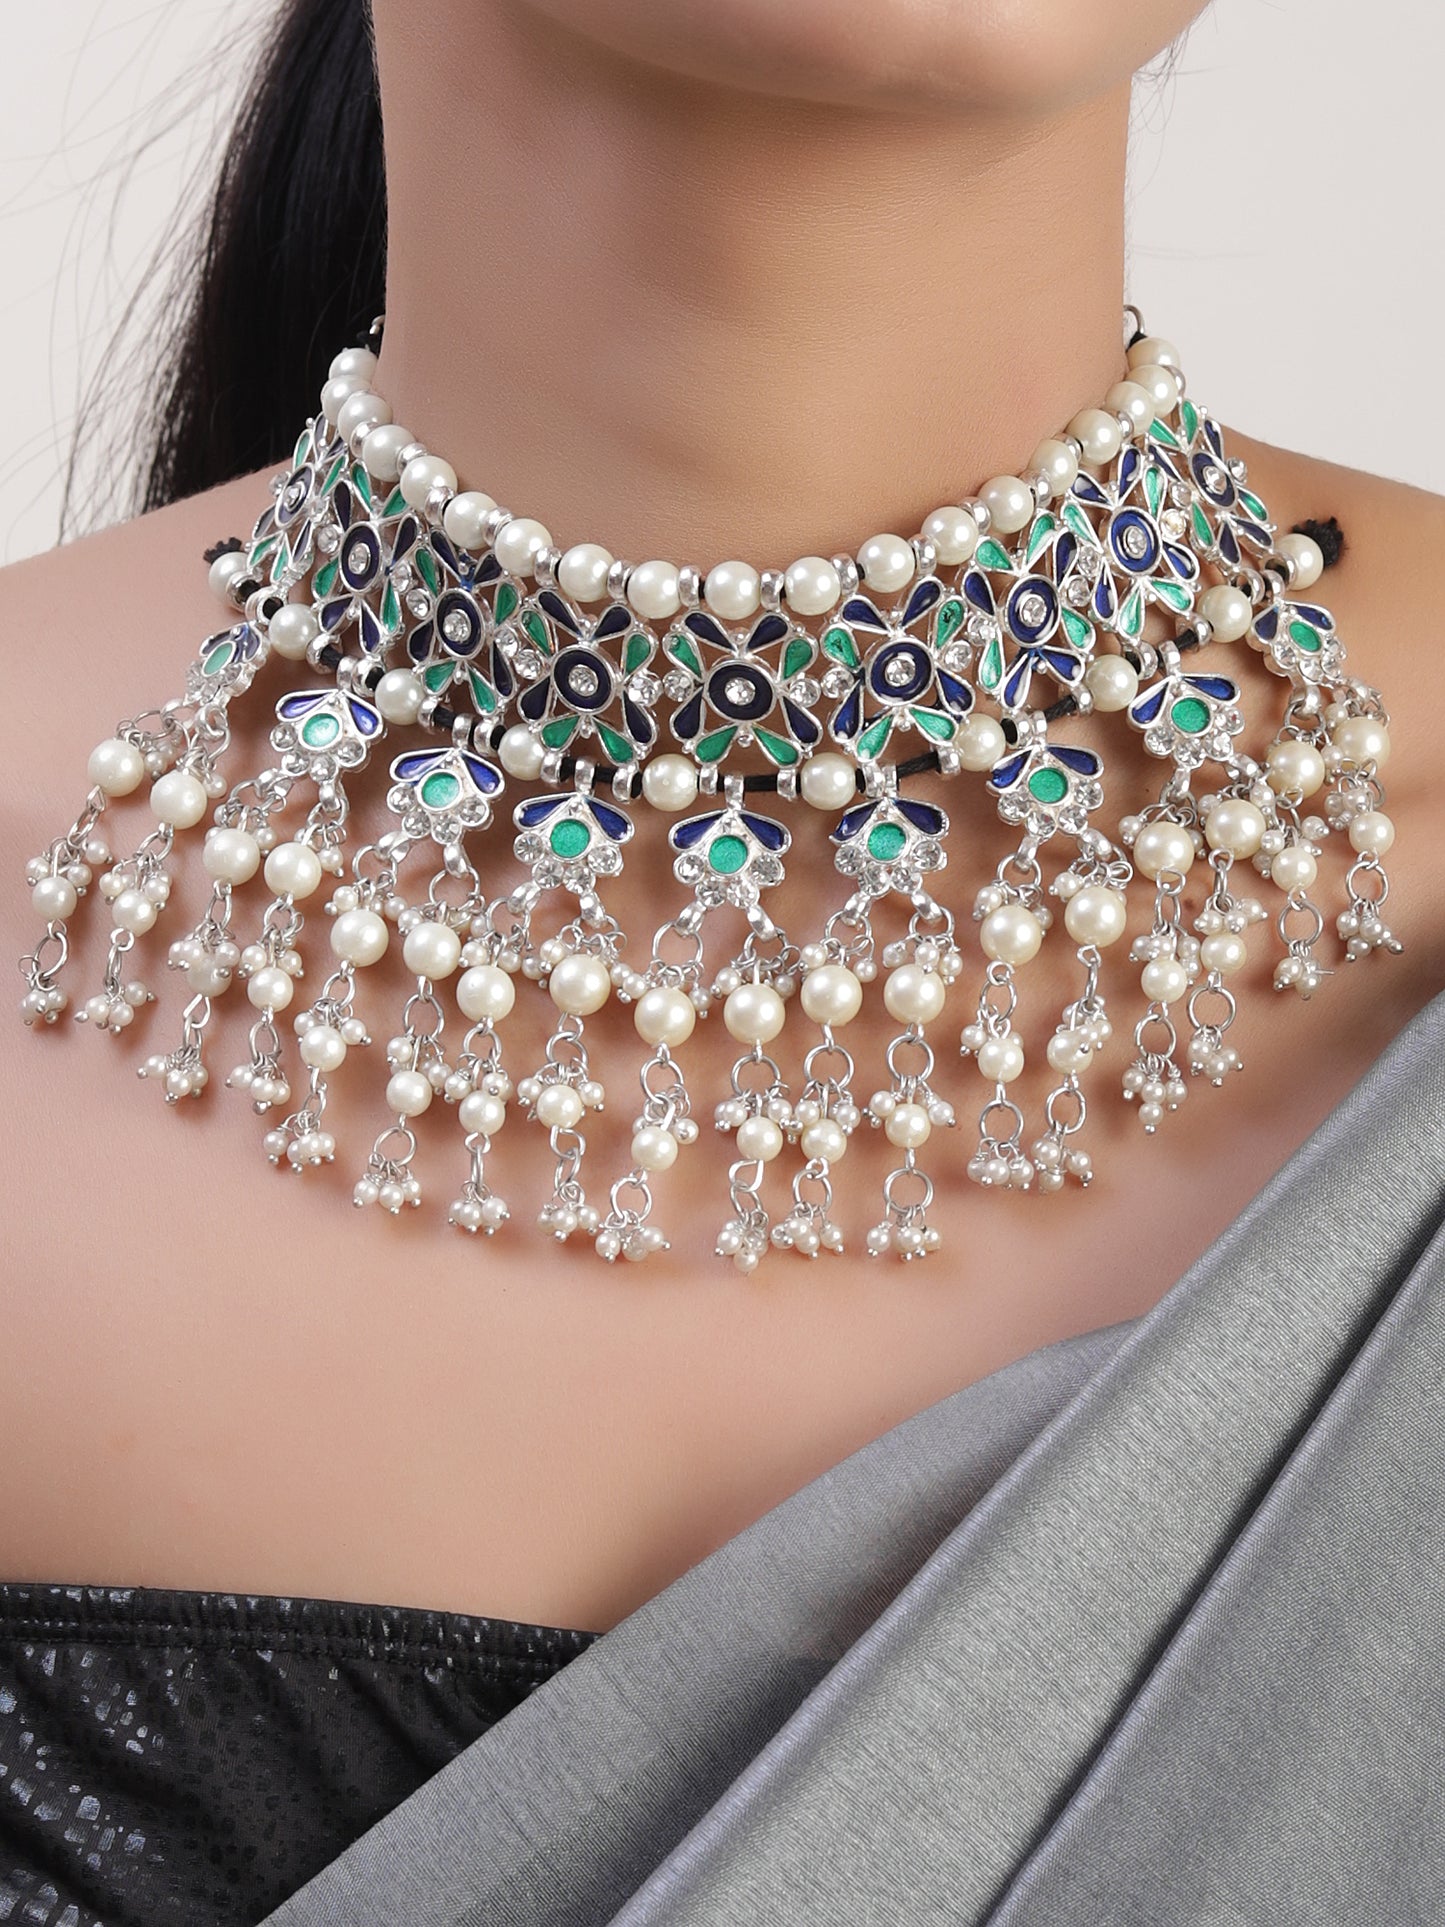 The Beady Pearly Meena Royal Necklace in Blue & Green